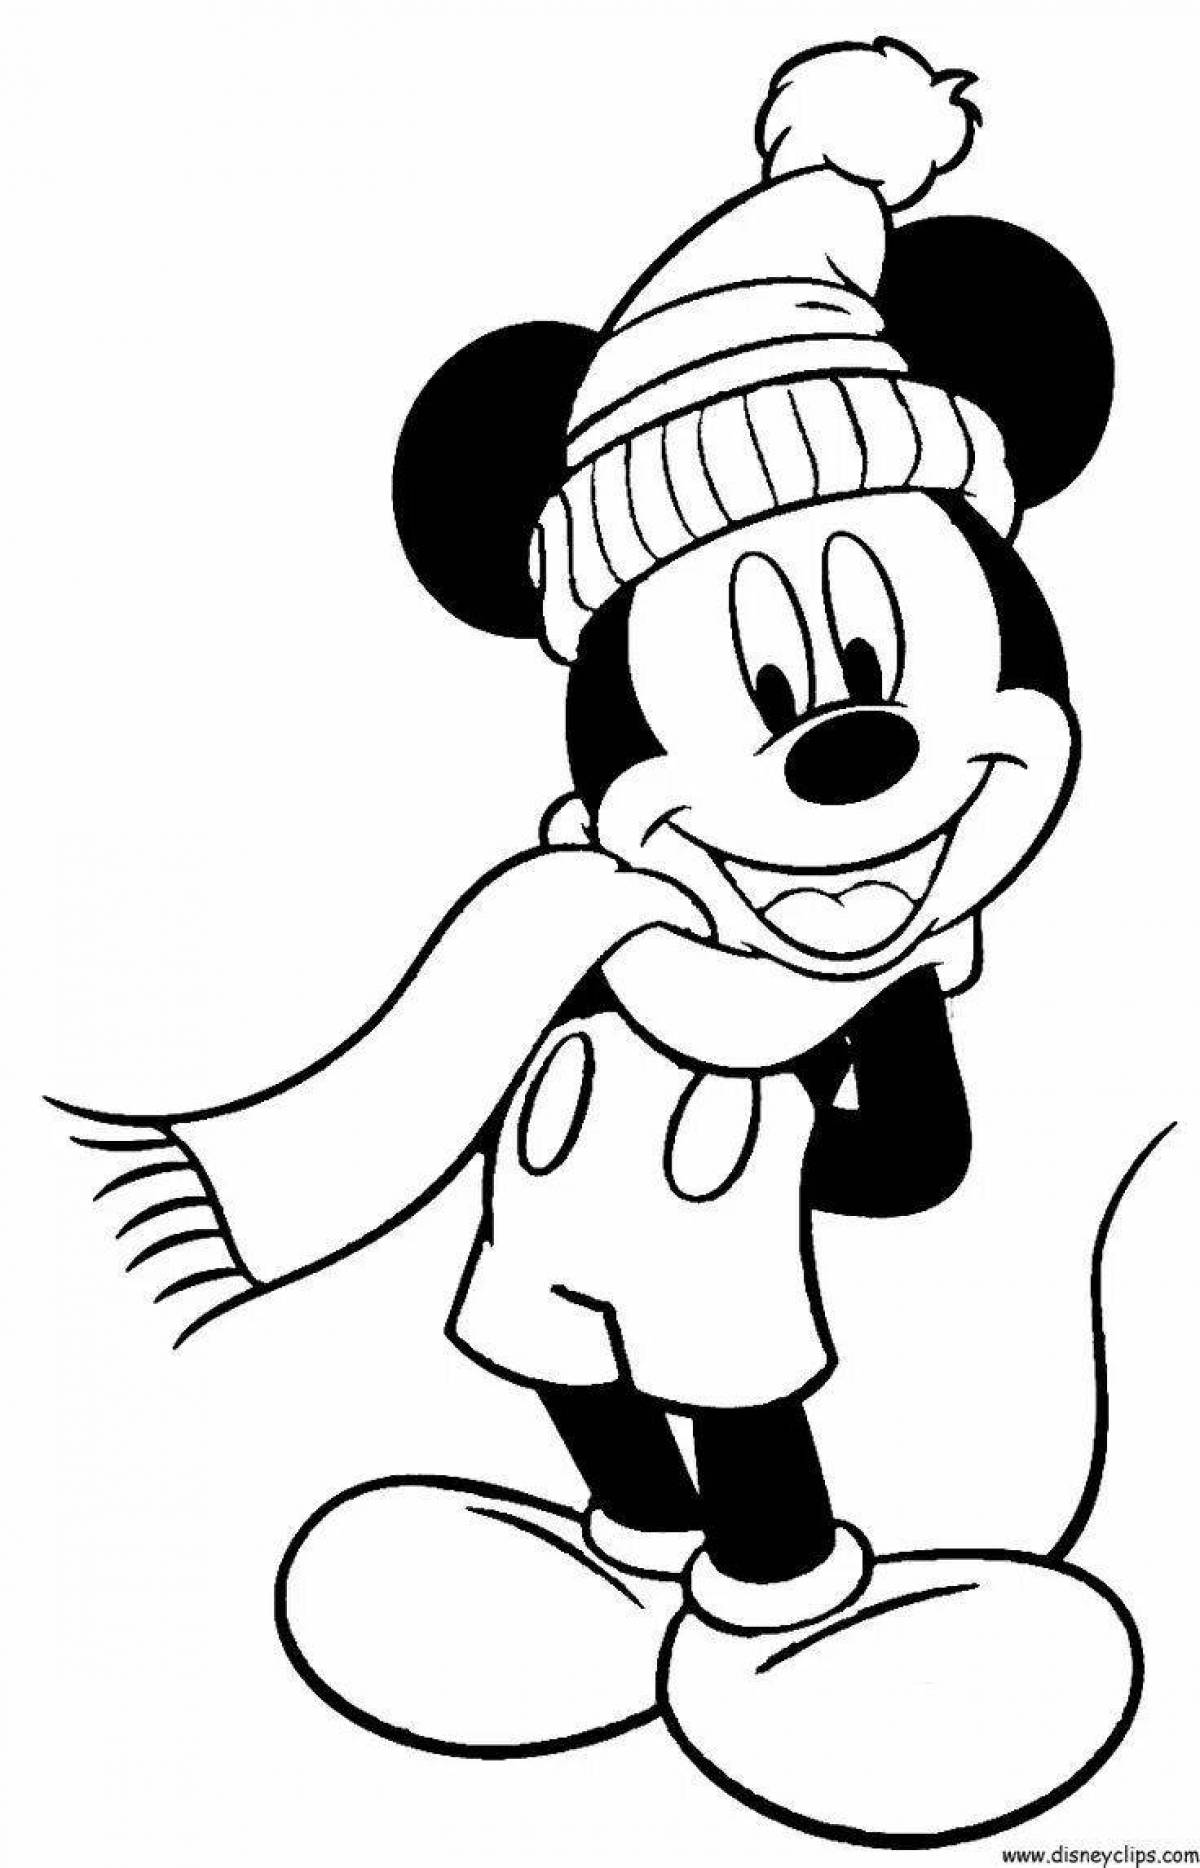 Exquisite mickey mouse christmas coloring book